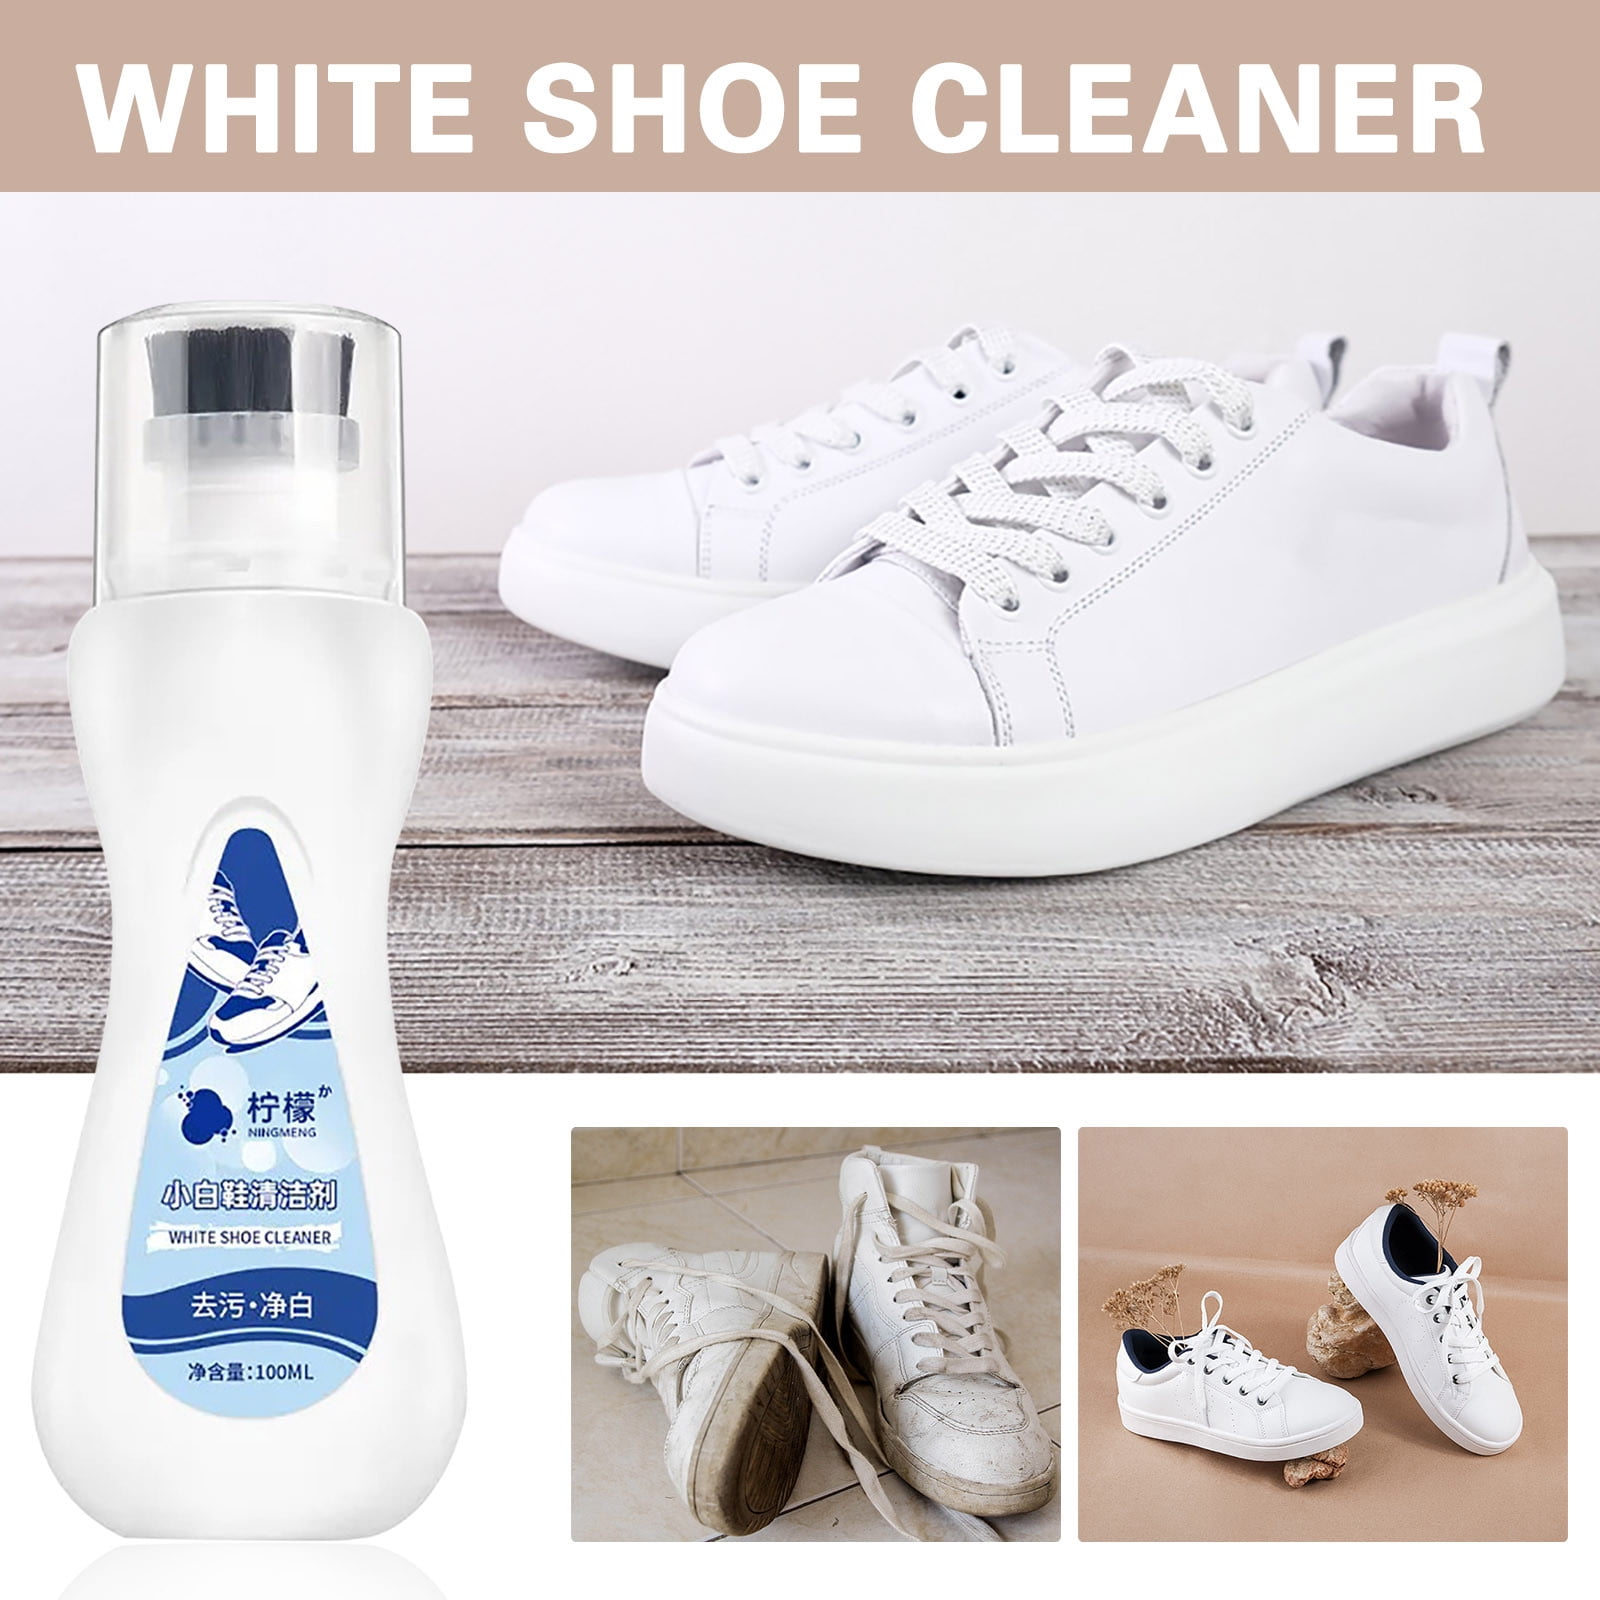 Shoe Cleaner Foaming Shoe Whitener Shoe Cleaner Kit For White Shoes Sneakers  Leather Shoes For Leather Vinyl Canvas Nylon And - AliExpress